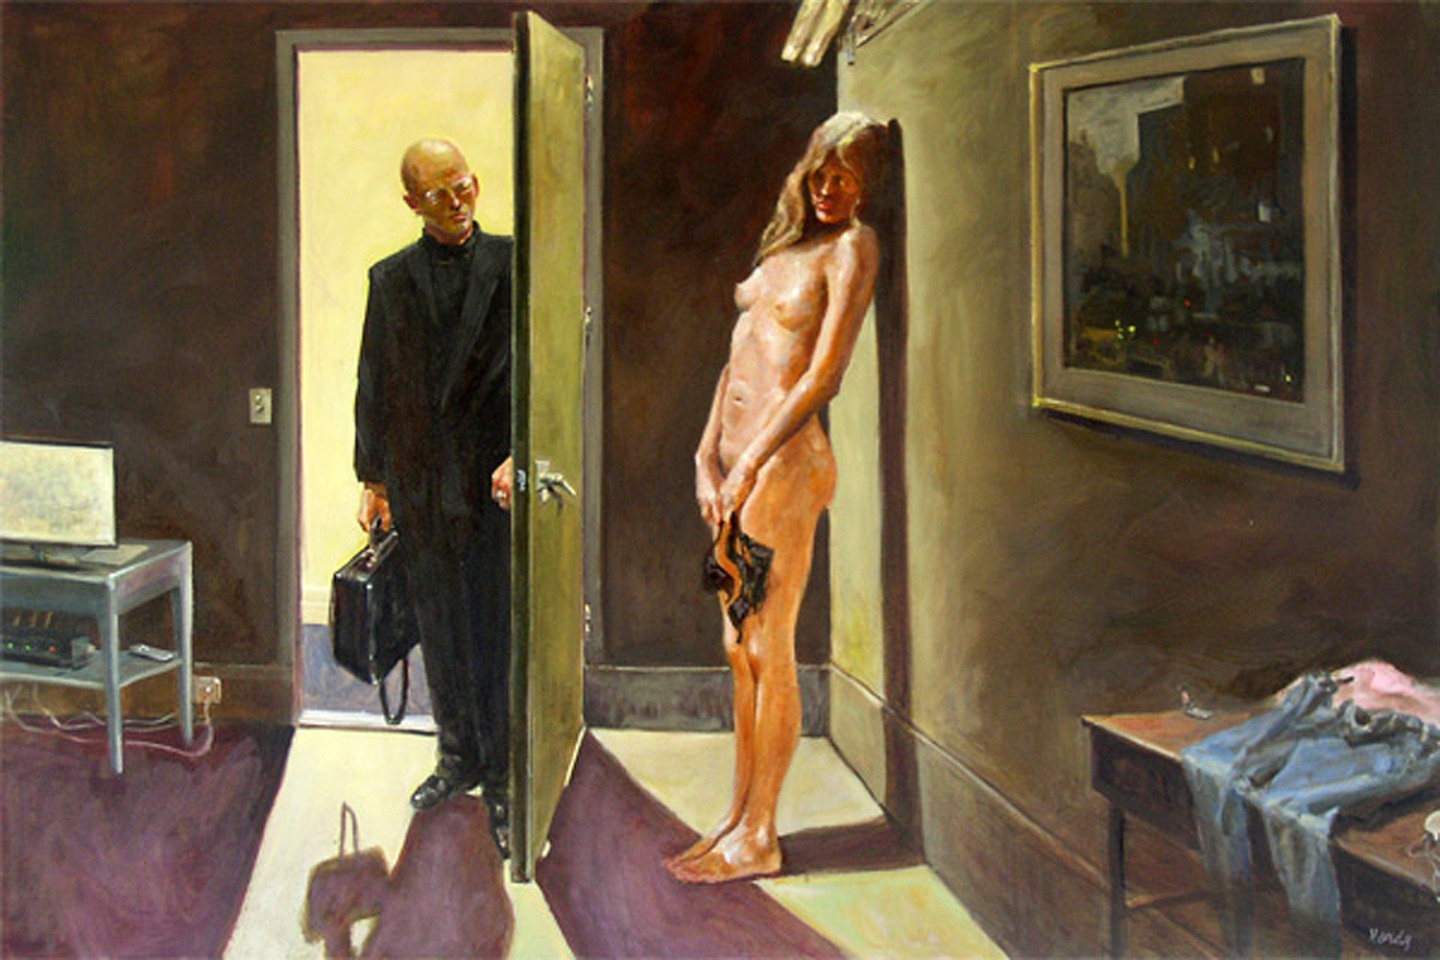 John Hardy, Finding Victoria's Secret, 2006-07
Oil on Canvas, 40 x 60 inches
HARD0016